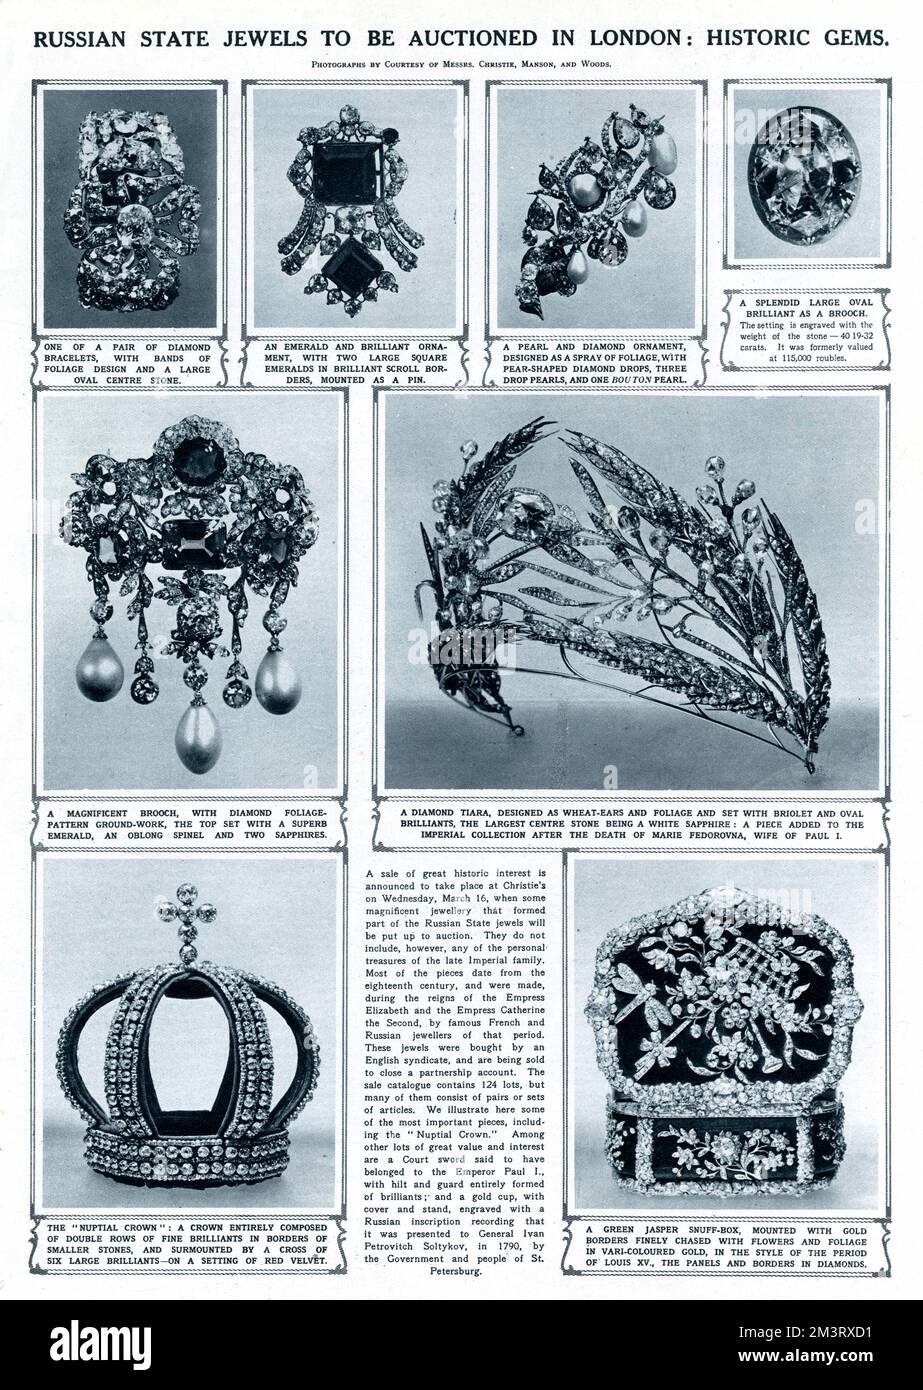 Page from The Illustrated London News reporting on a sale of magnificent jewellery forming part of the Russian state jewels, which were auctioned at Christies in 1927.  Most of the pieces dated back to the eighteenth century, and were made during the reigns of Empress Elizabeth and the Empress Catherine the Second.  Illustrated here are some of the most important pieces including (bottom left), the Nuptial Crown, an exquisite diamond tiara and a number beautiful brooches.       Date: 1927 Stock Photo